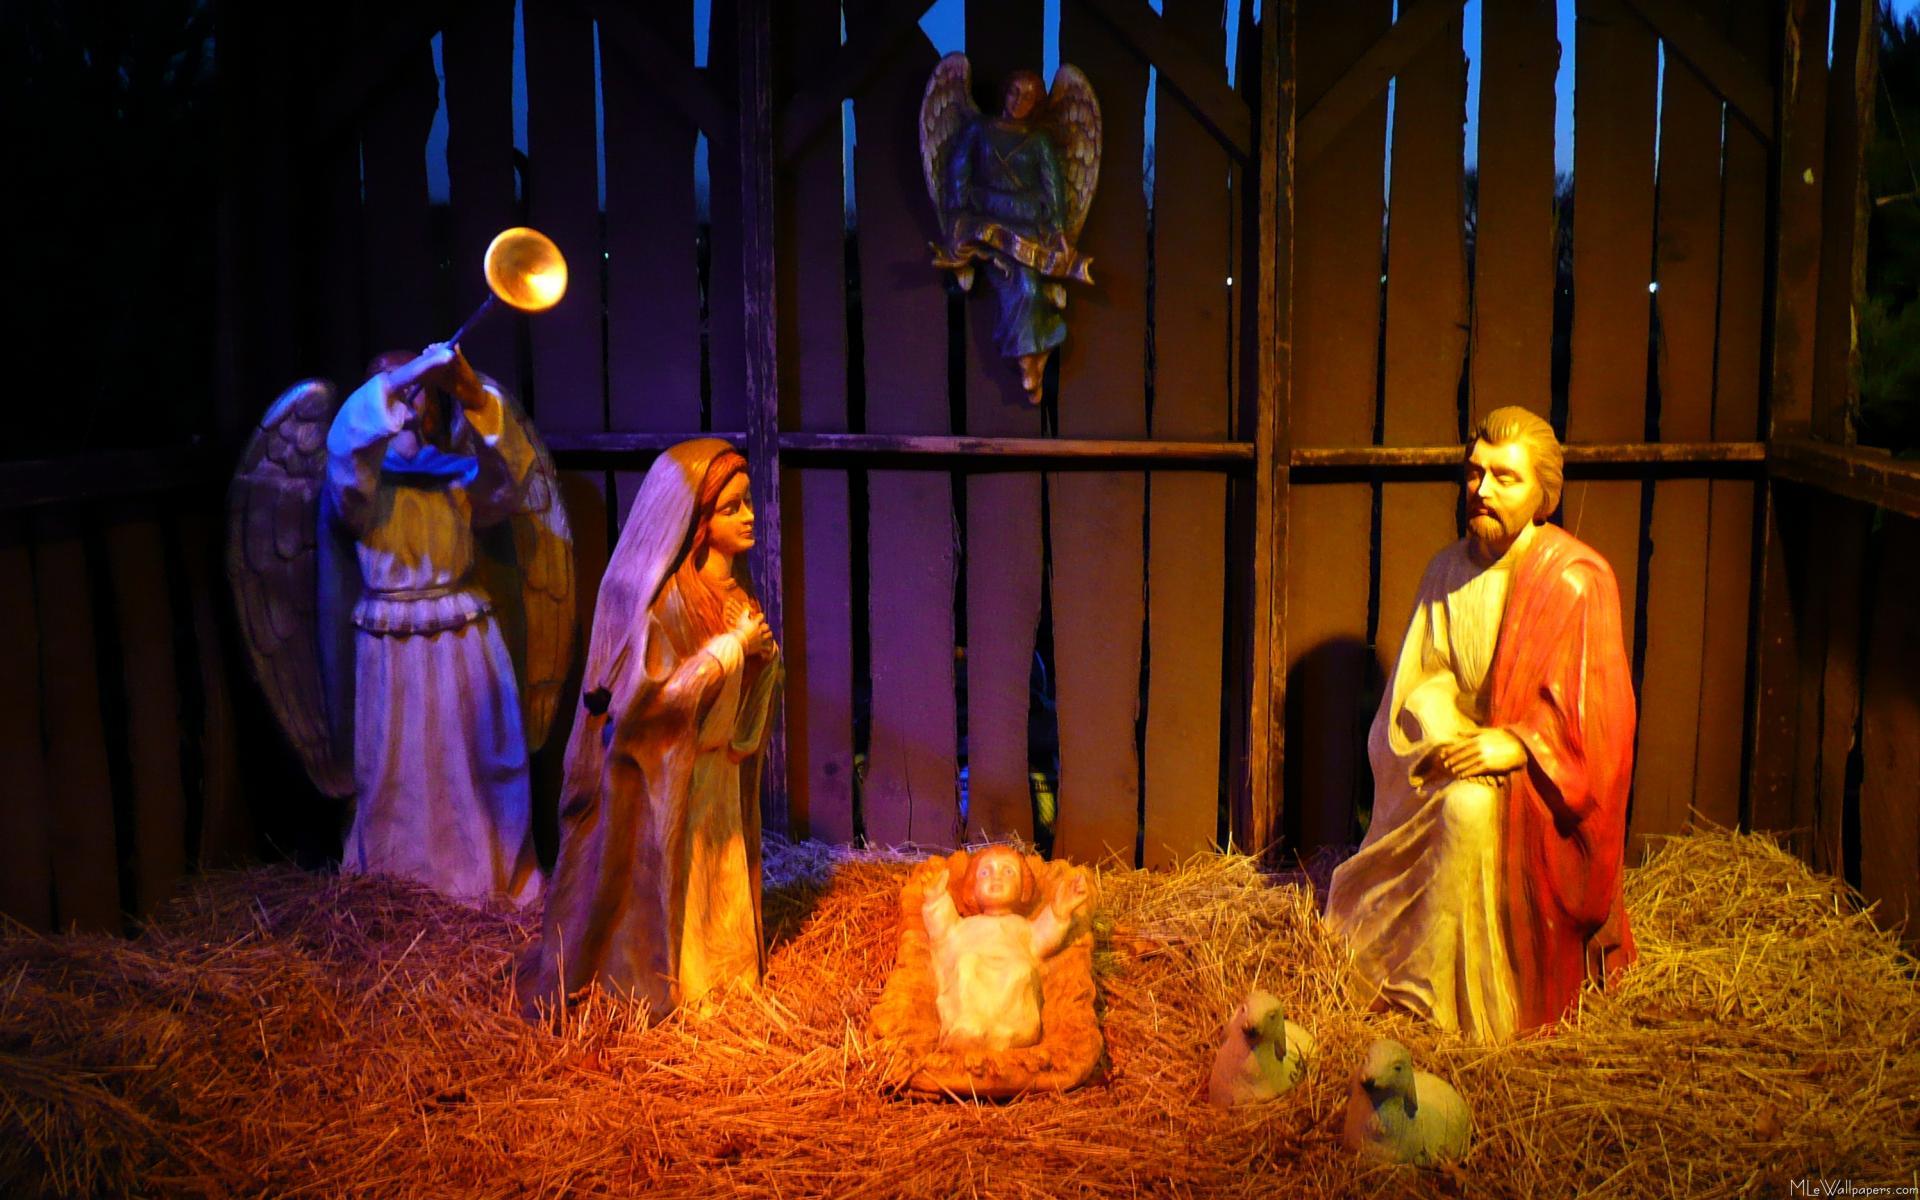 Ohio town could be legally liable due to official nativity